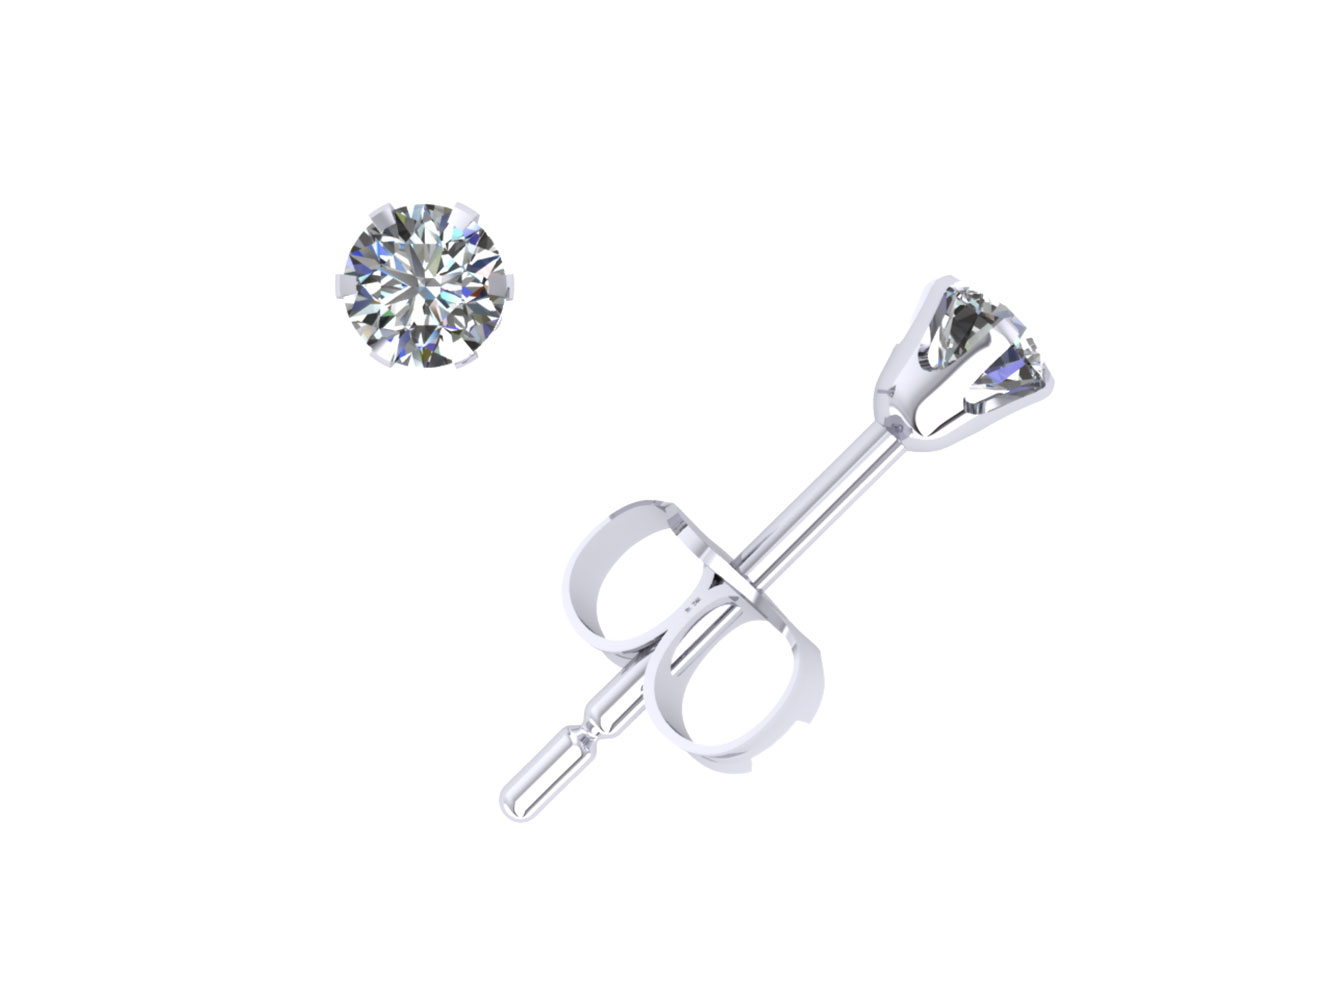 Jewel We Sell 0.15CT Round Cut Diamond Solitaire Stud Earrings 18k White or Yellow Gold 6Prong Push Back F VS2